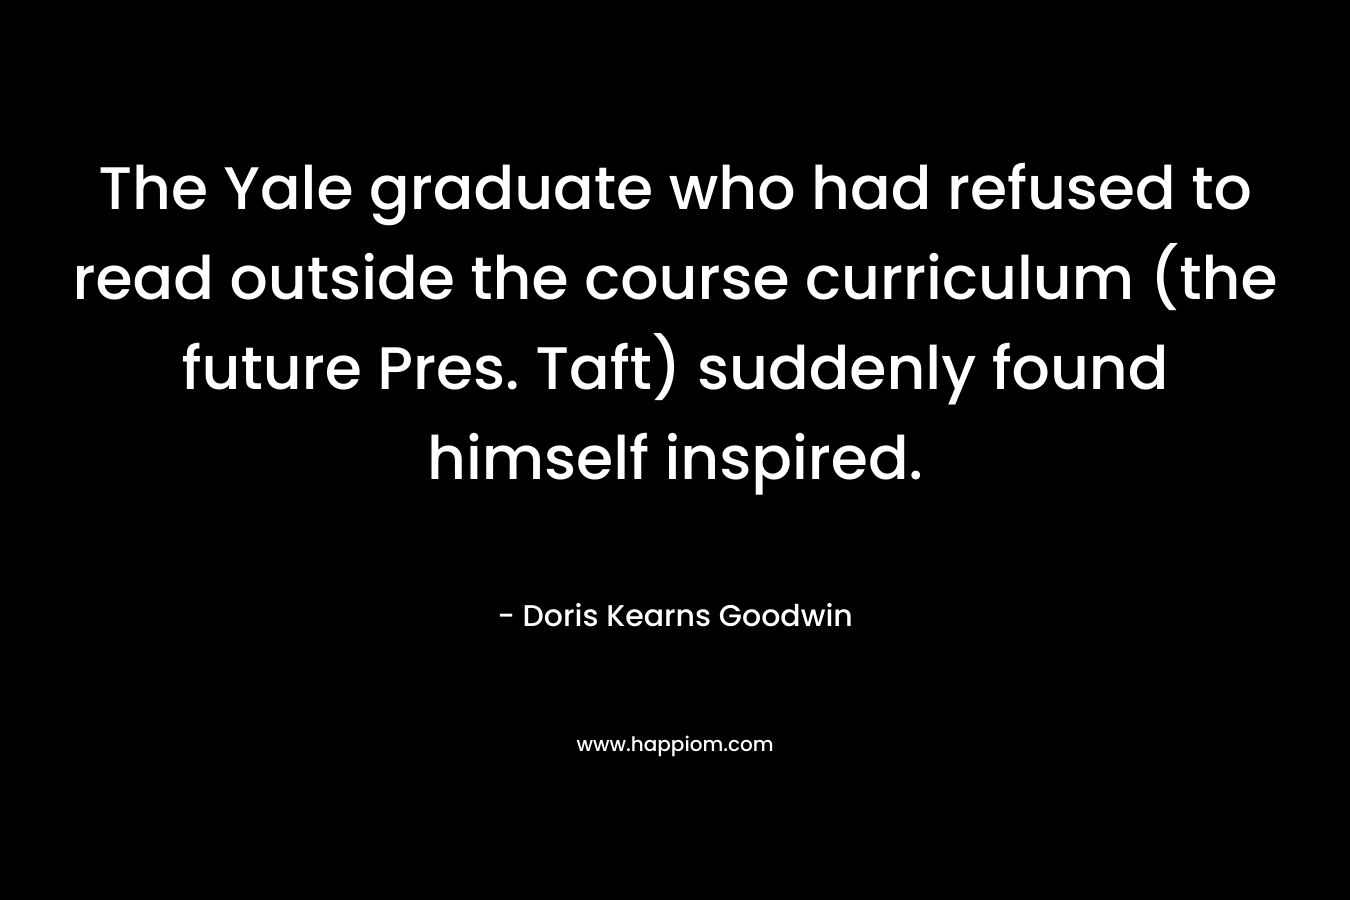 The Yale graduate who had refused to read outside the course curriculum (the future Pres. Taft) suddenly found himself inspired.